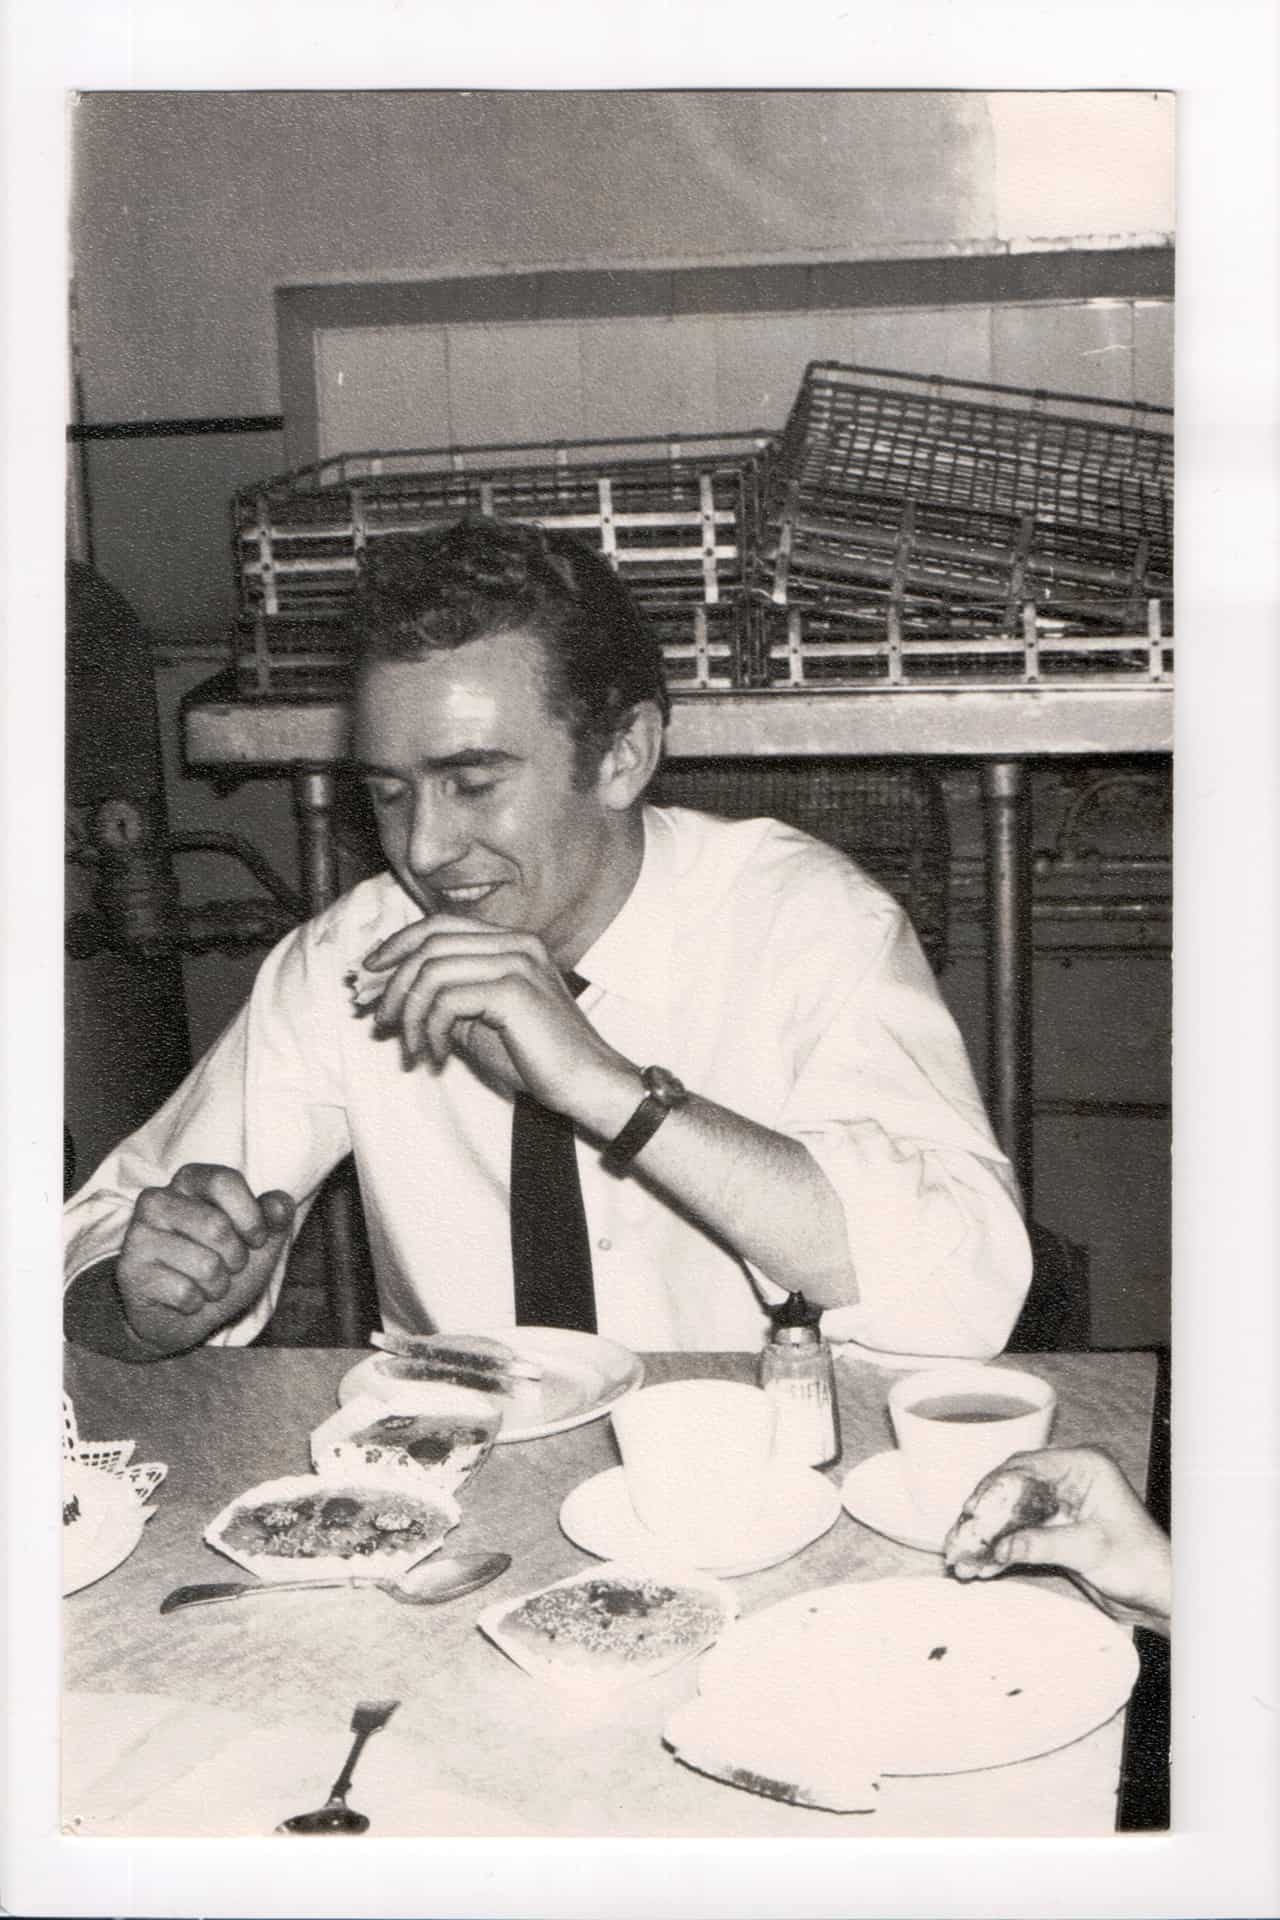 Bill was a very active person and very slim but he had a massive appetite as can be seen here.